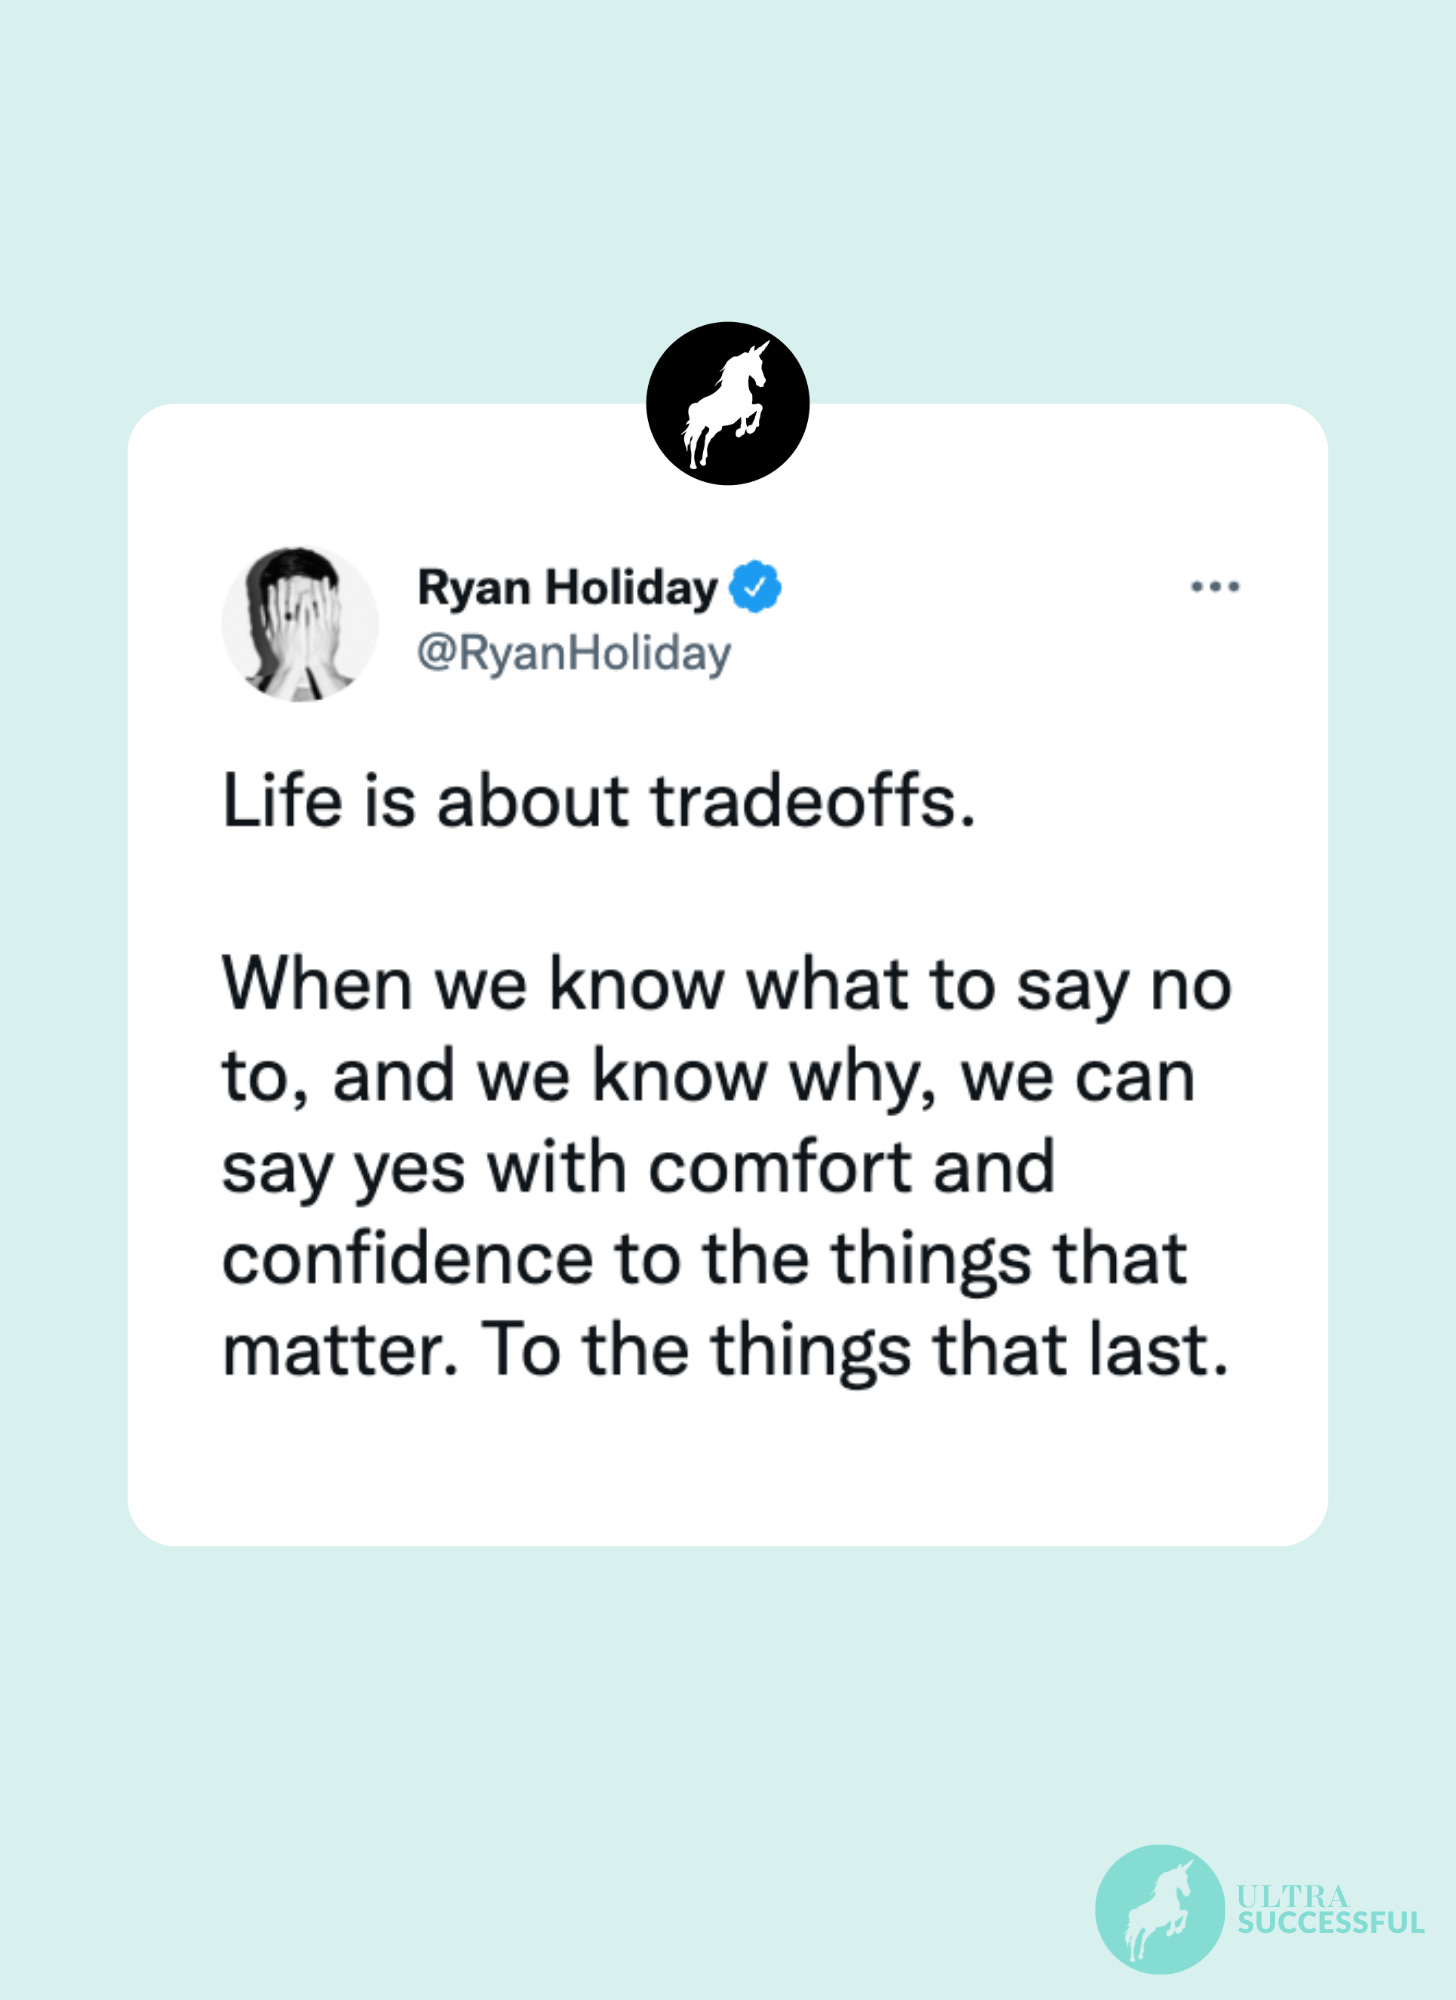 @RyanHoliday: Life is about tradeoffs.   When we know what to say no to, and we know why, we can say yes with comfort and confidence to the things that matter. To the things that last.